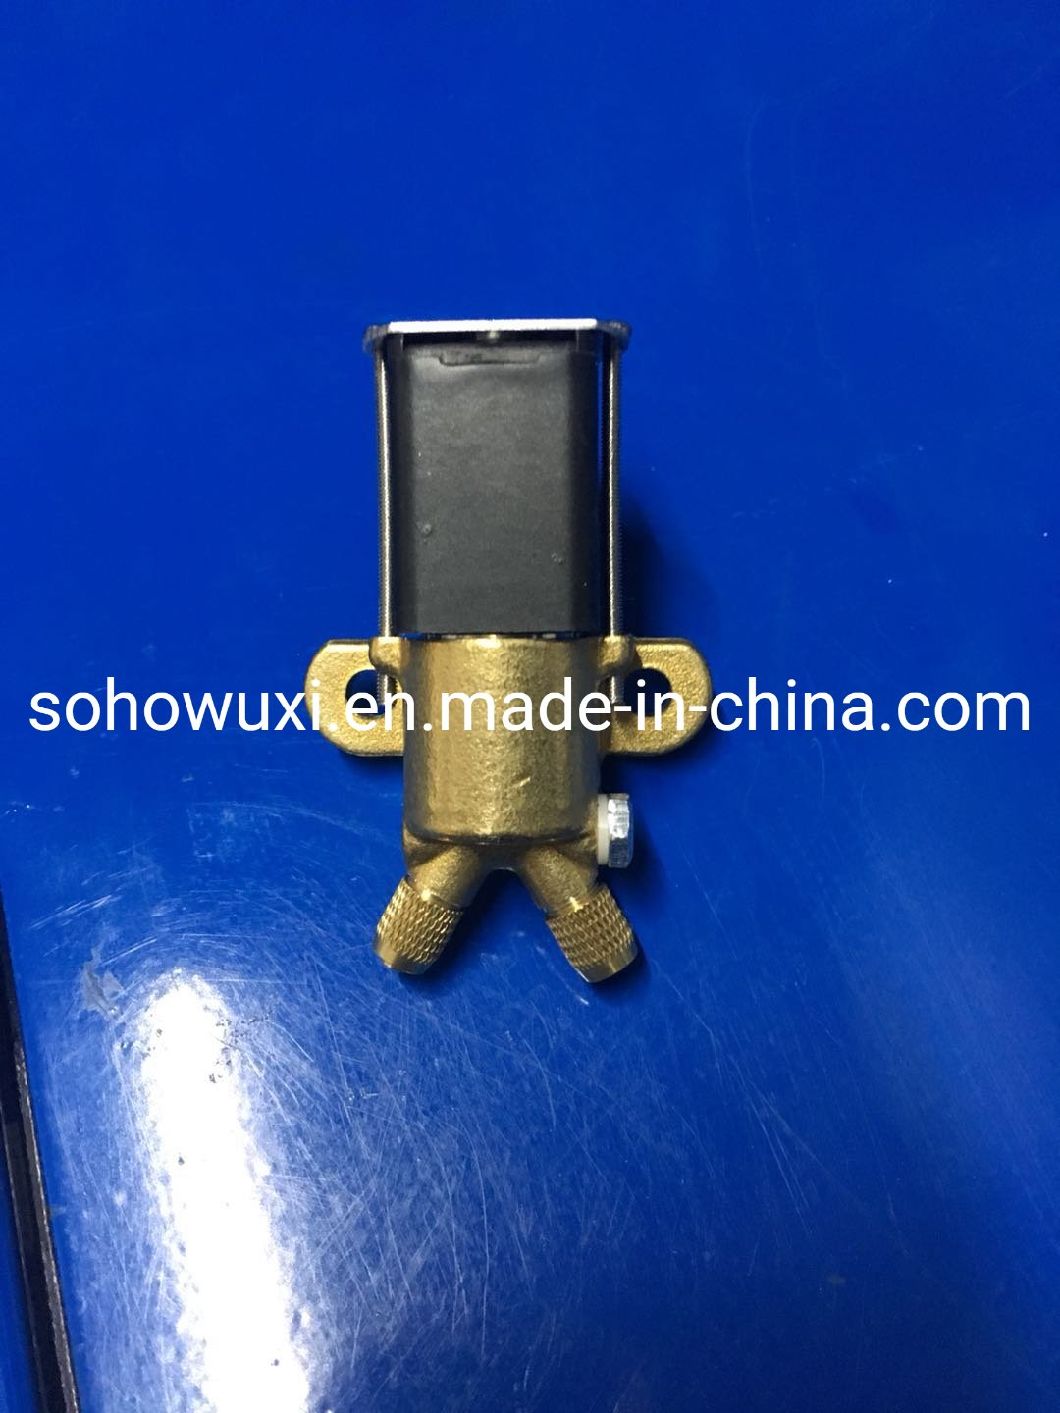 Picanol Relay Solenoid Valve Be320519 for Omni+800